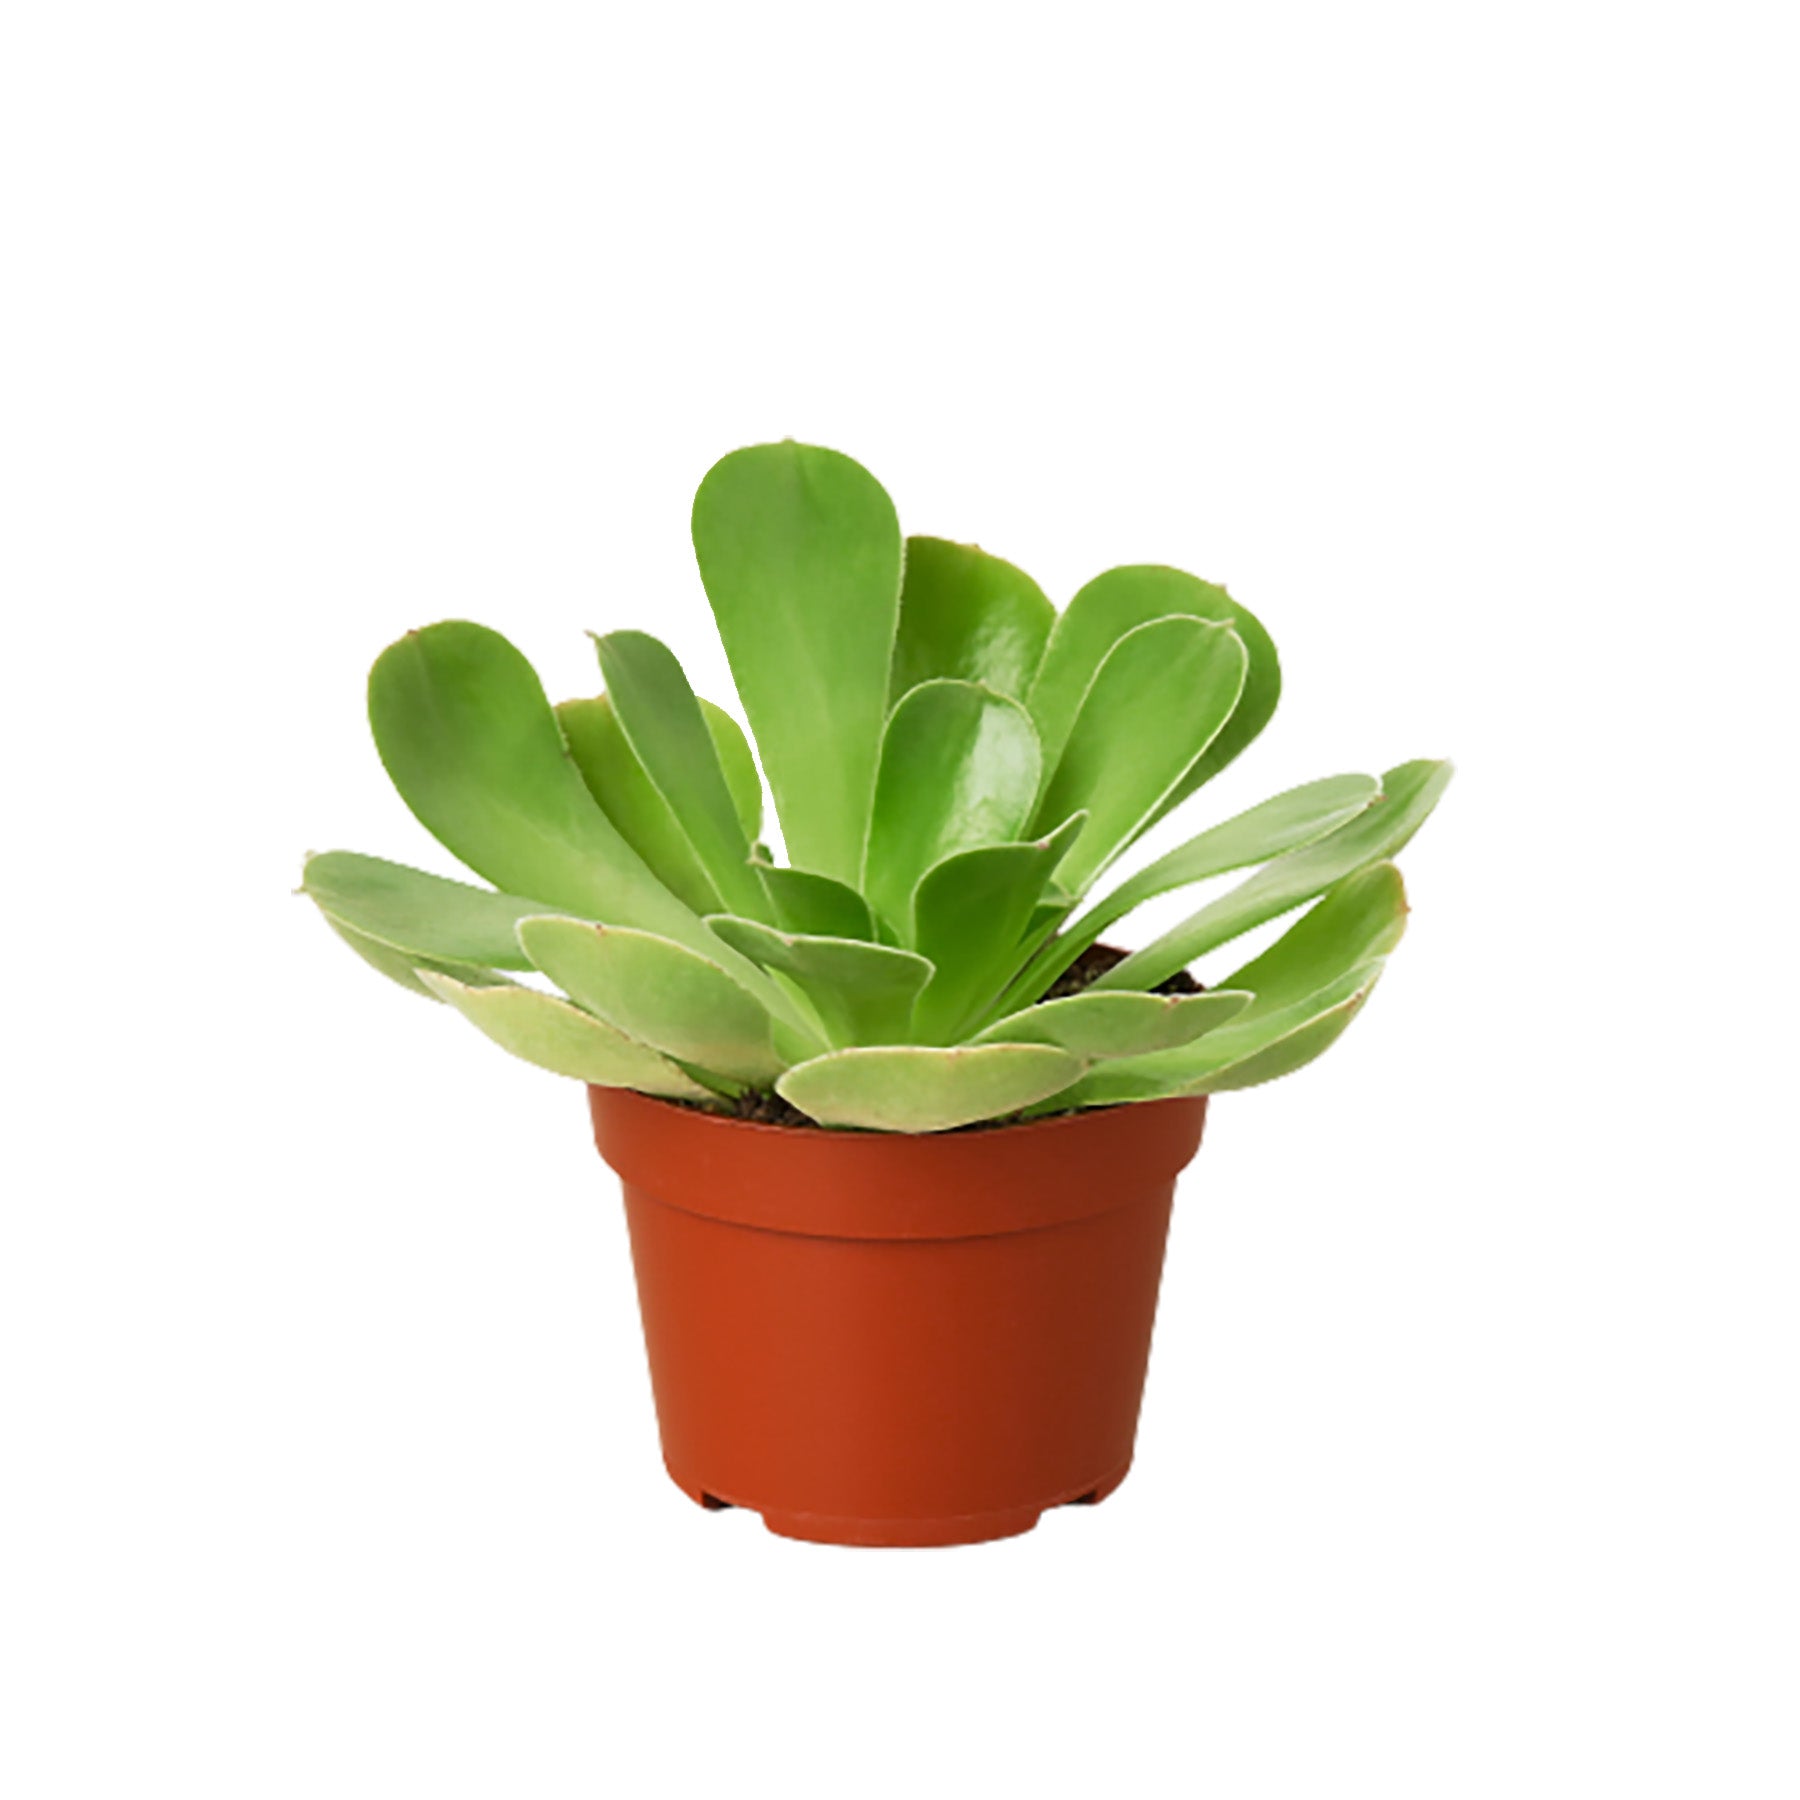 A succulent plant in a pot on a white background, available at one of the top plant nurseries near me.